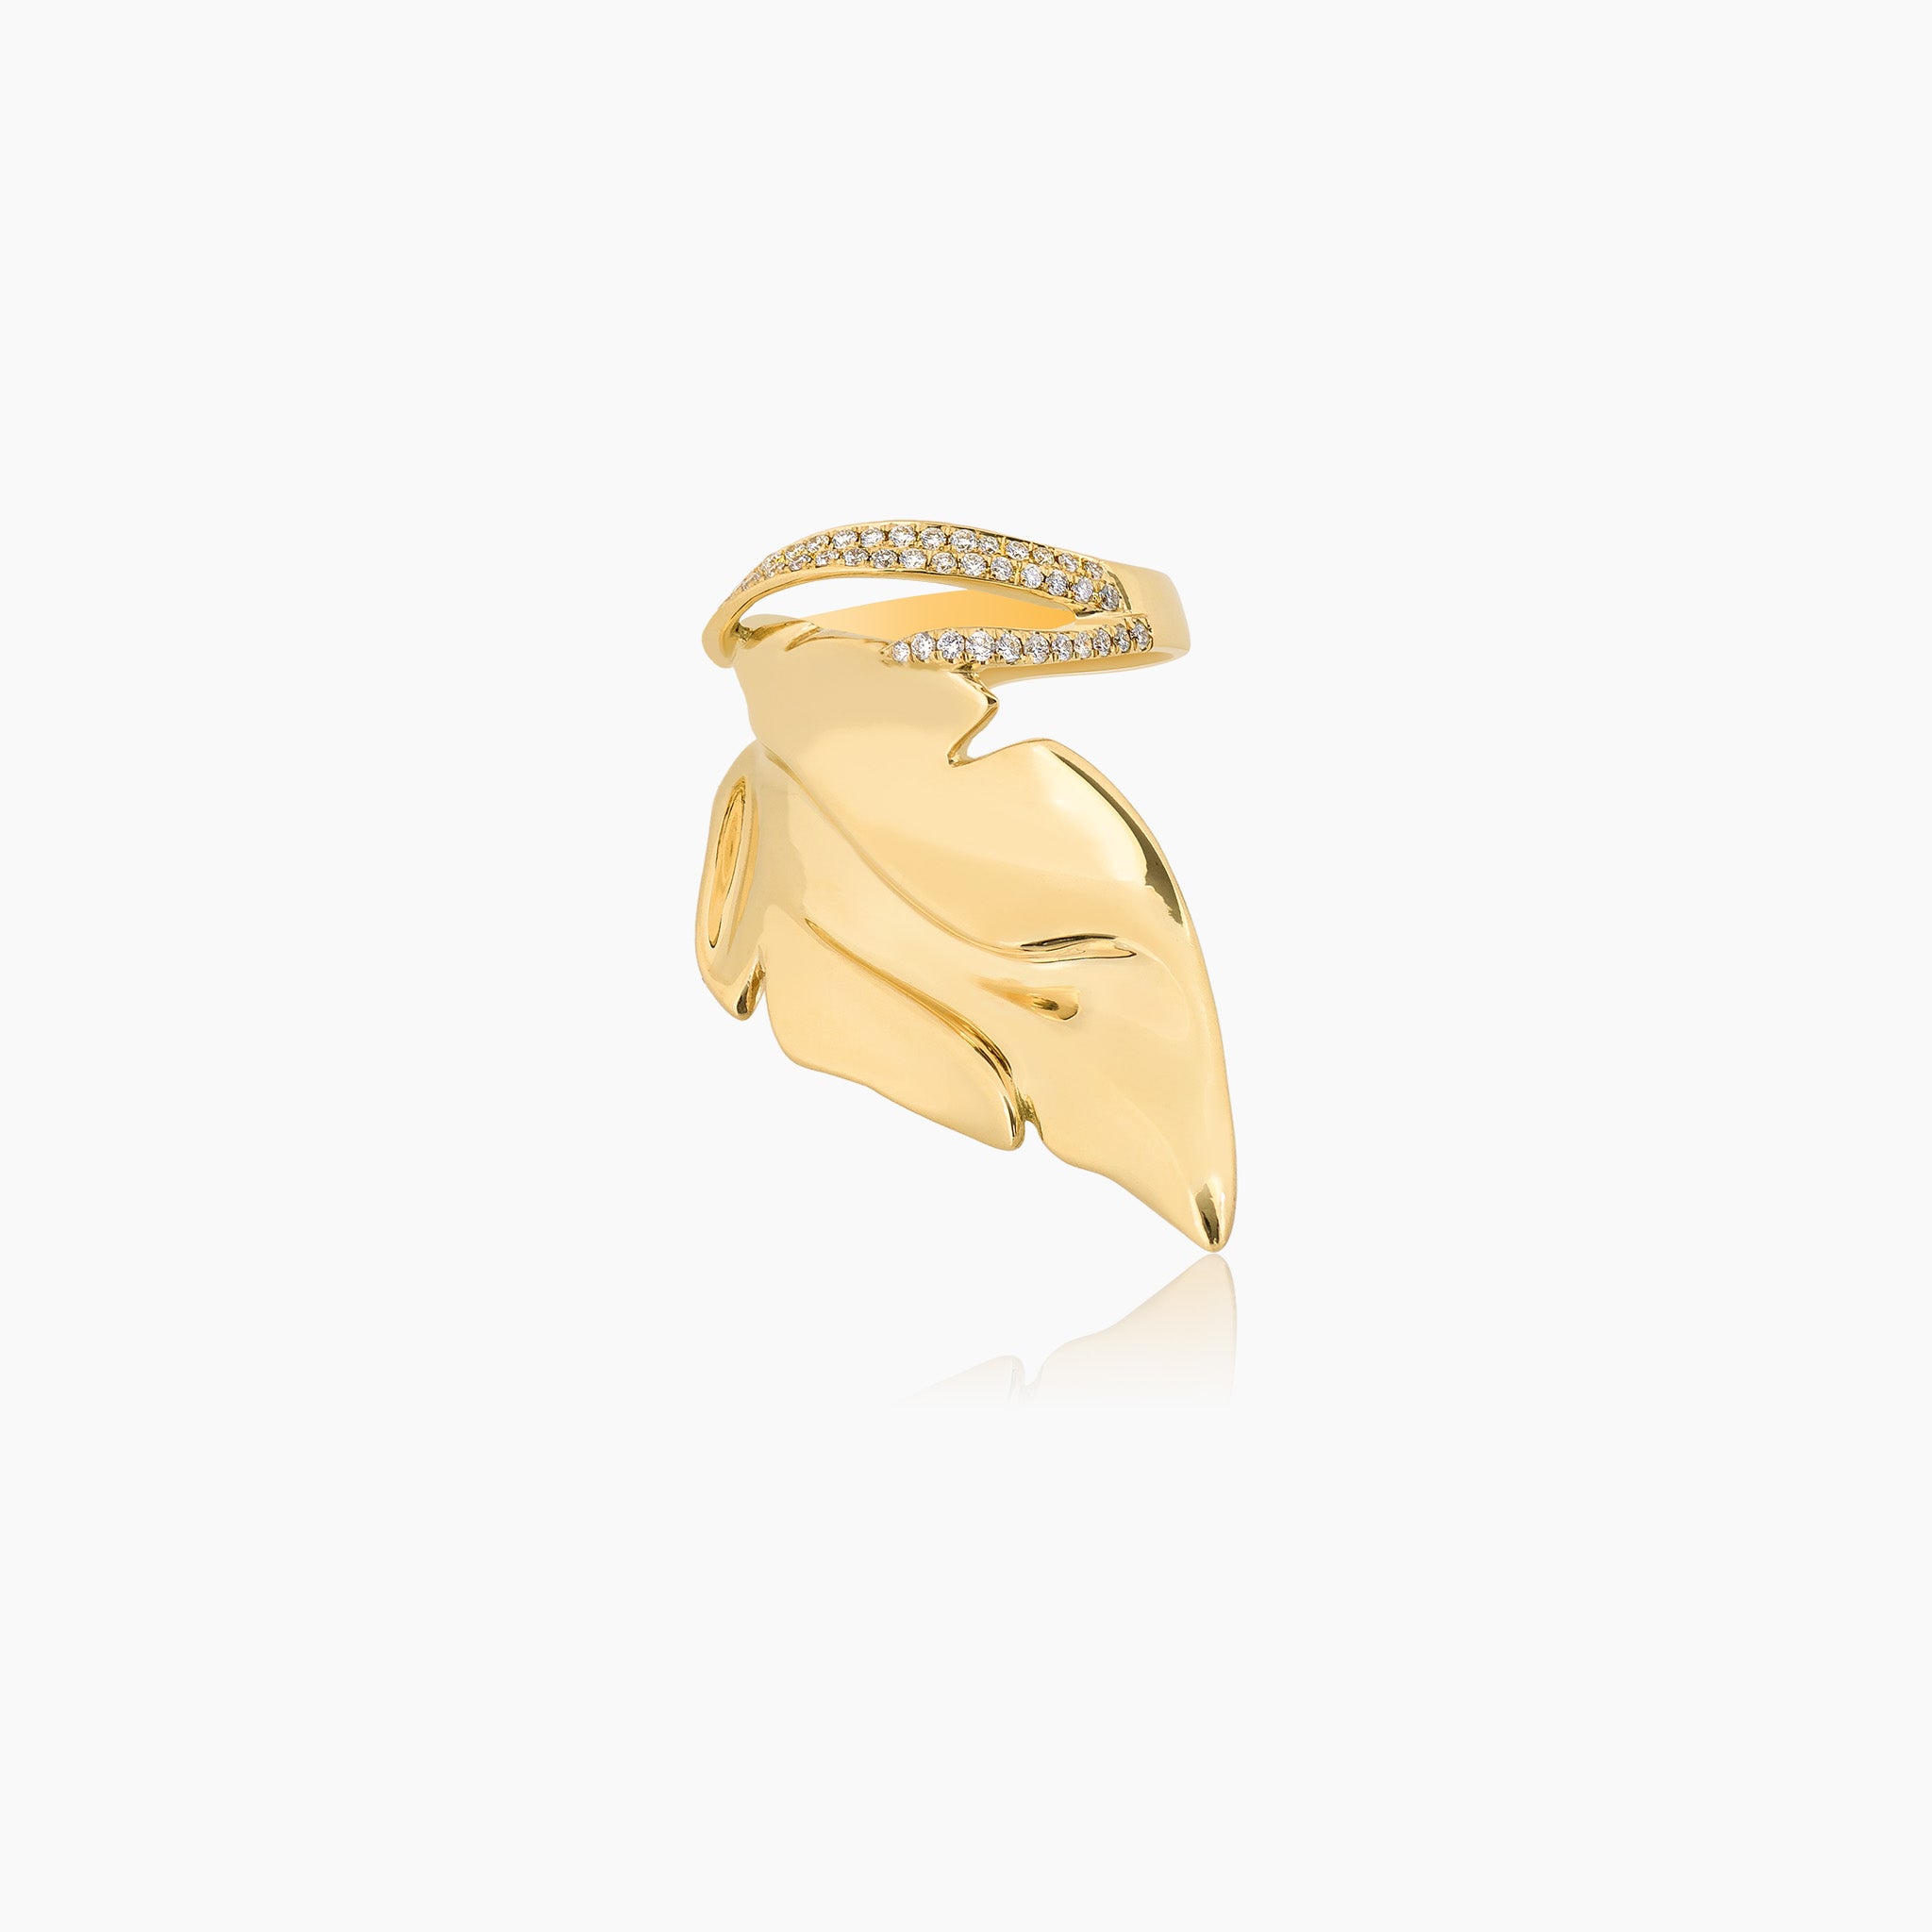 Hand-carved yellow gold leaf-shaped ring, adorned with exquisite details and diamonds, displayed against an off-white background.